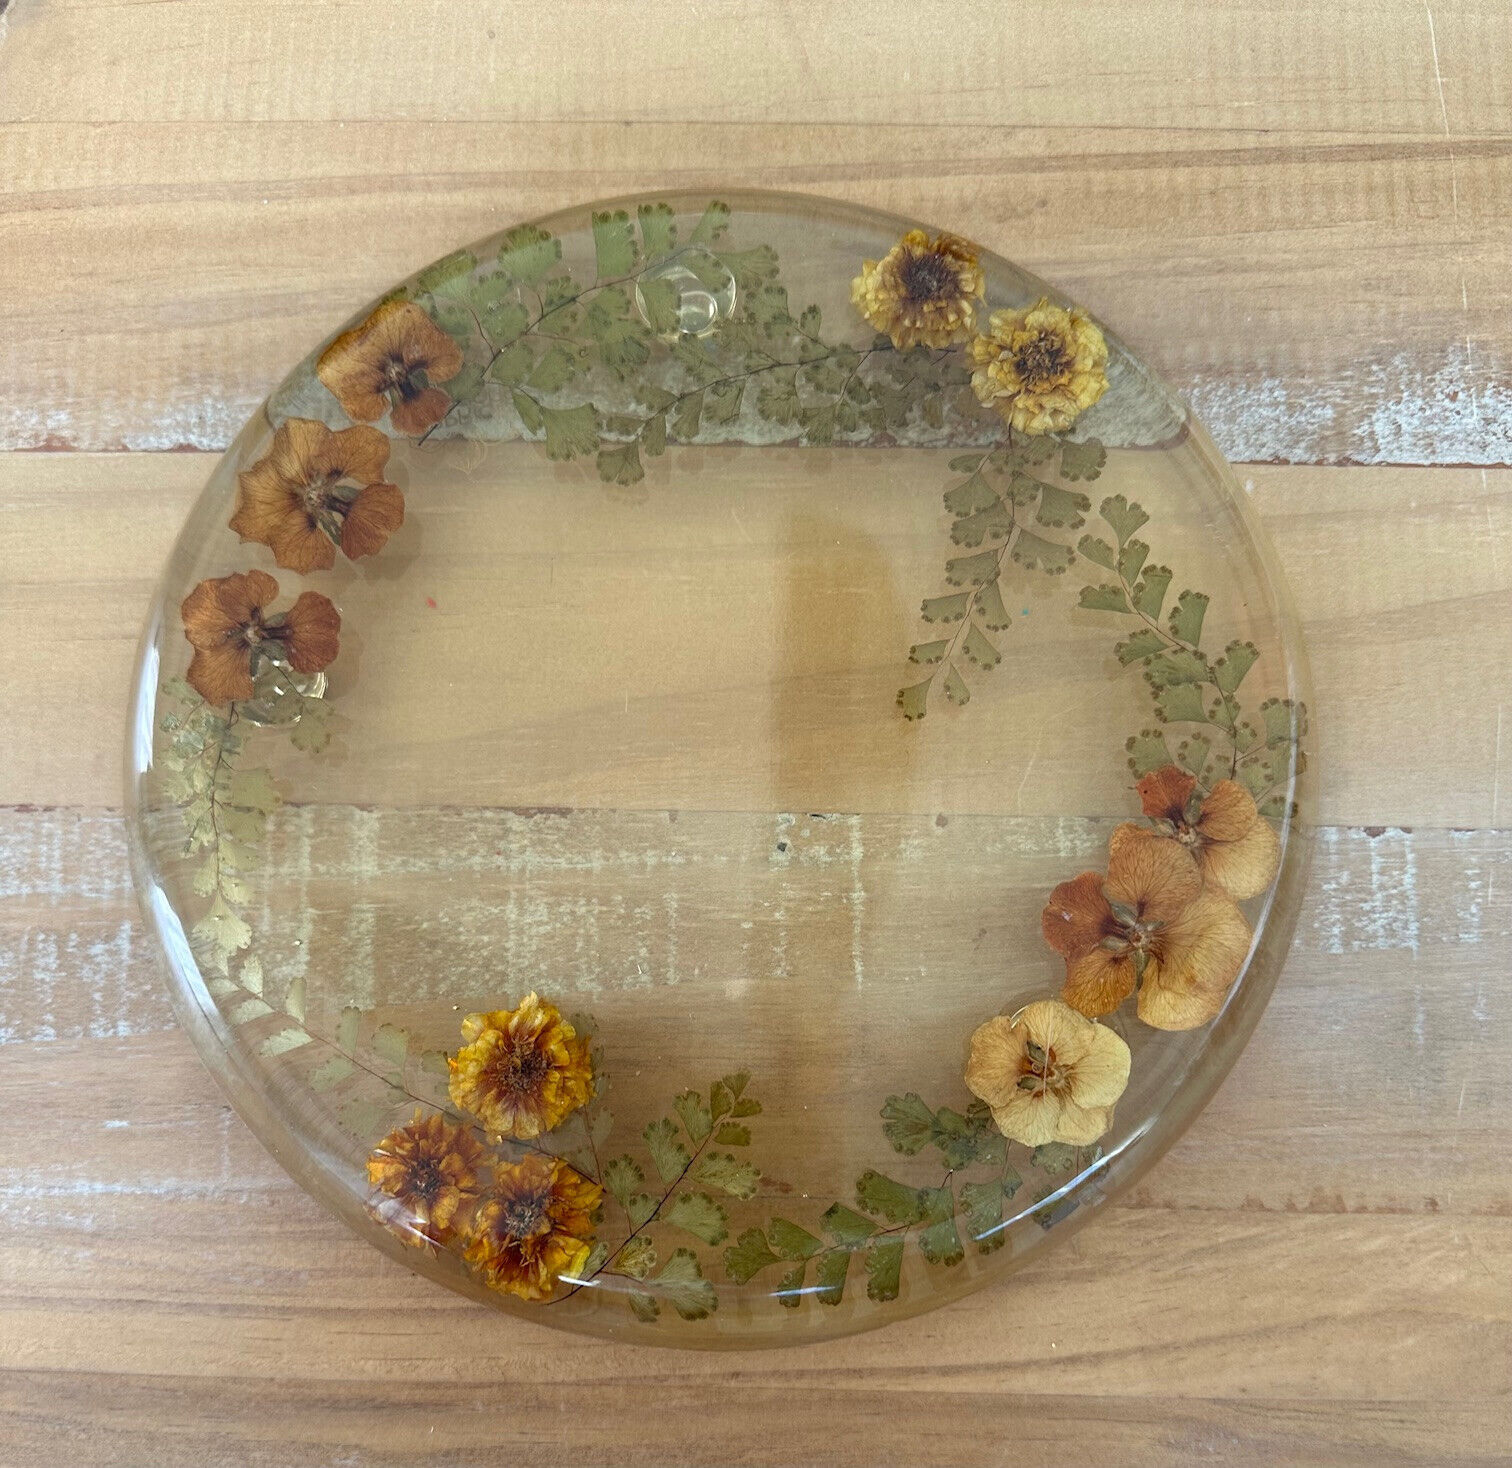 Vintage Footed Pressed Dried Flower Lucite Trivet Capricia Creations 8”